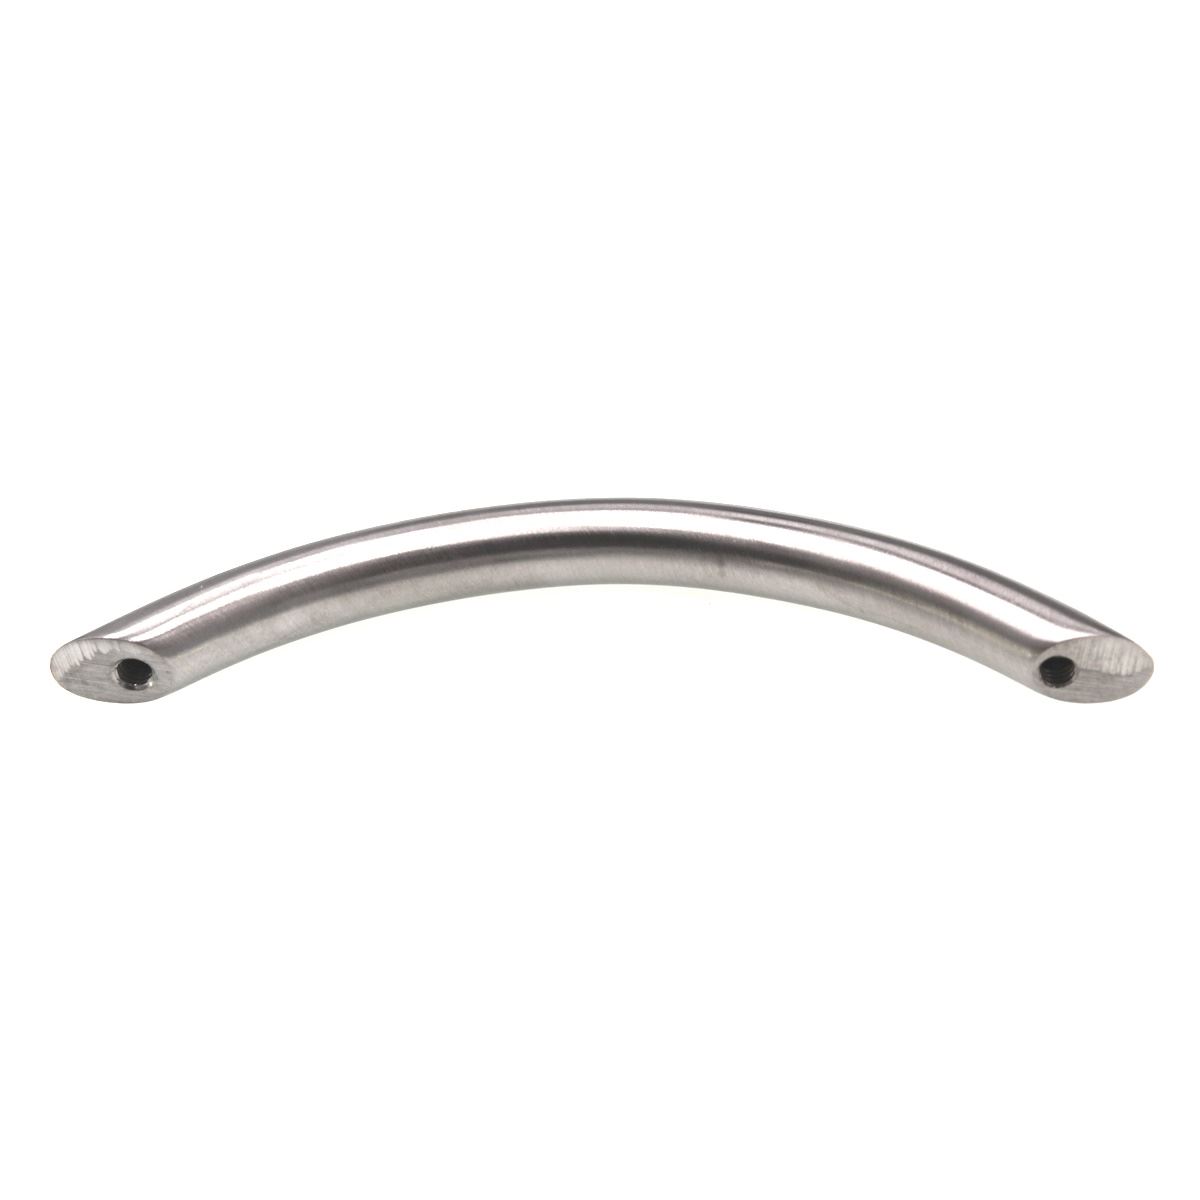 Schaub Cabinet Bow Arch Pull 3 3/4" (96mm) Ctr Brushed Stainless Steel SSBOW096